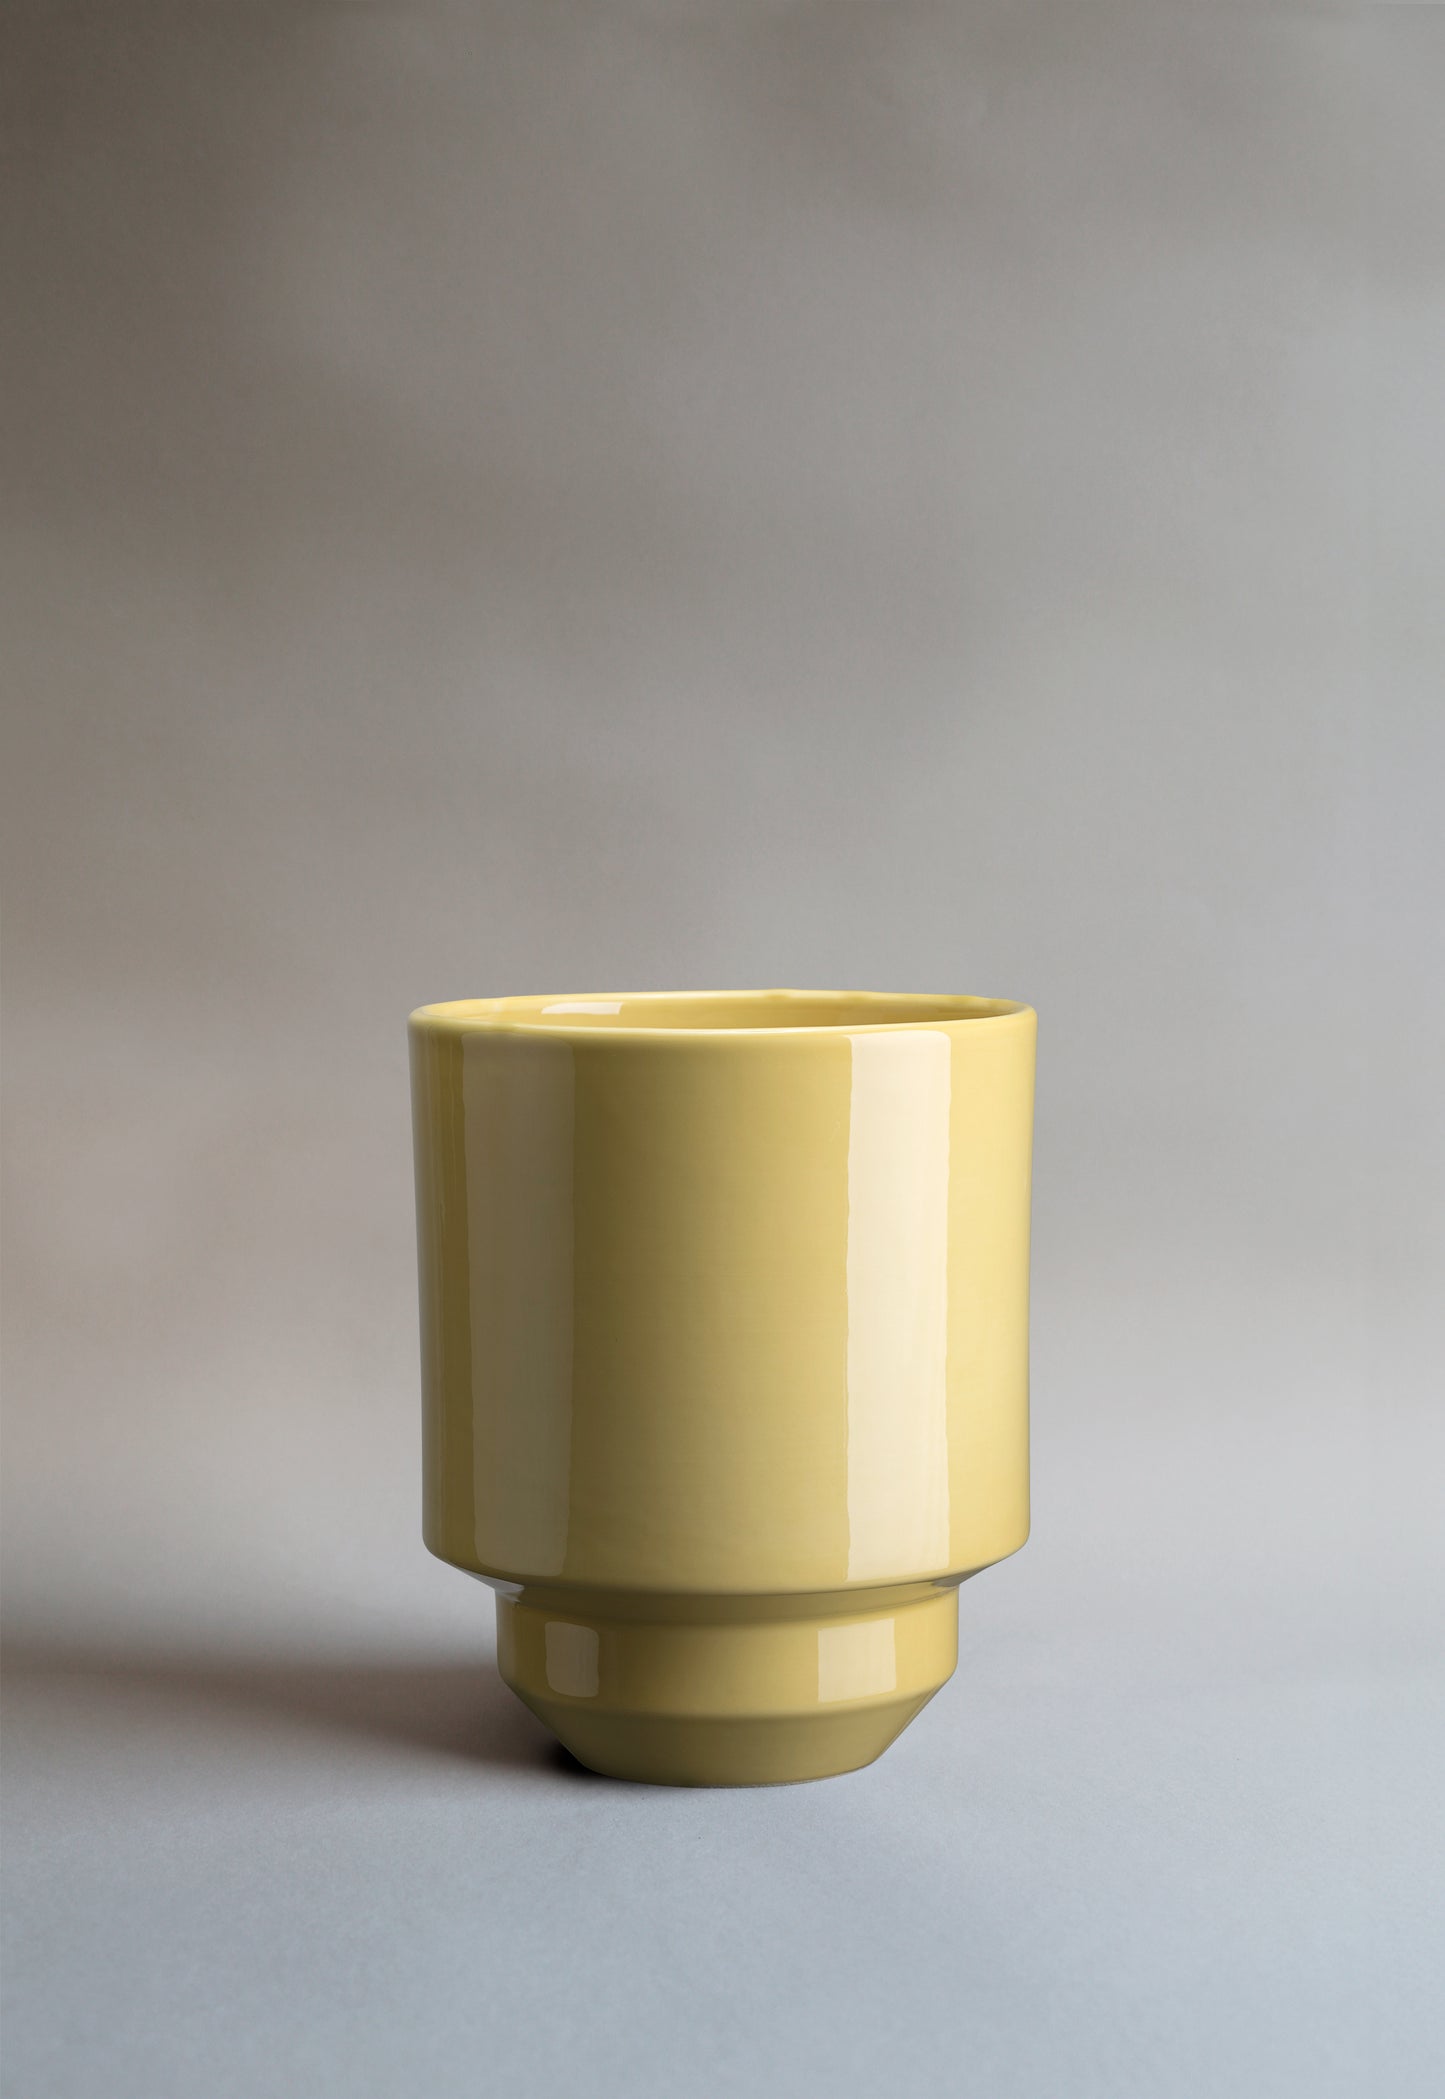 The inspiration for the timeless glazing palette of the Glazed Hoff Pot is rooted in Scandinavia.Hoff Glazed Pale Yellow Indoor Pot 18 cm